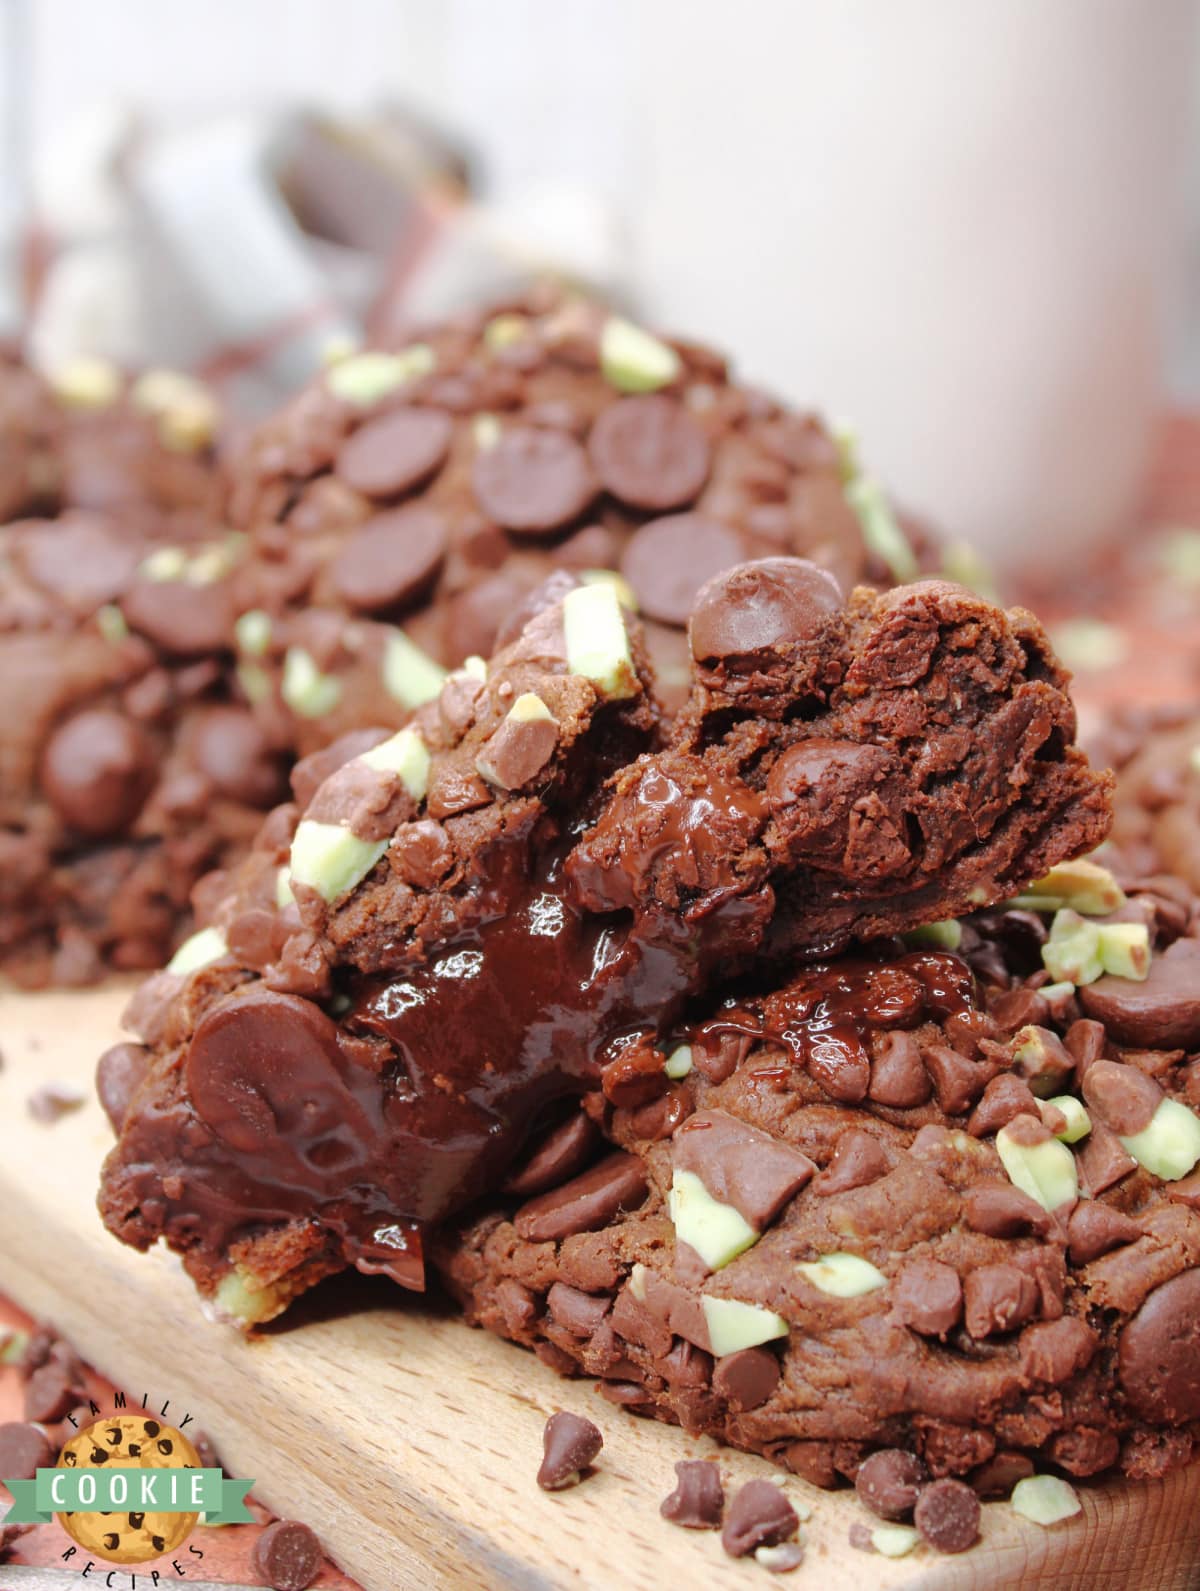 Andes Mint Stuffed Chocolate Cookies are rich chocolate mint cookies that are filled with chocolate ganache and a grasshopper cookie in the middle. Tons of mint flavor in this amazing chocolate cookie recipe!  